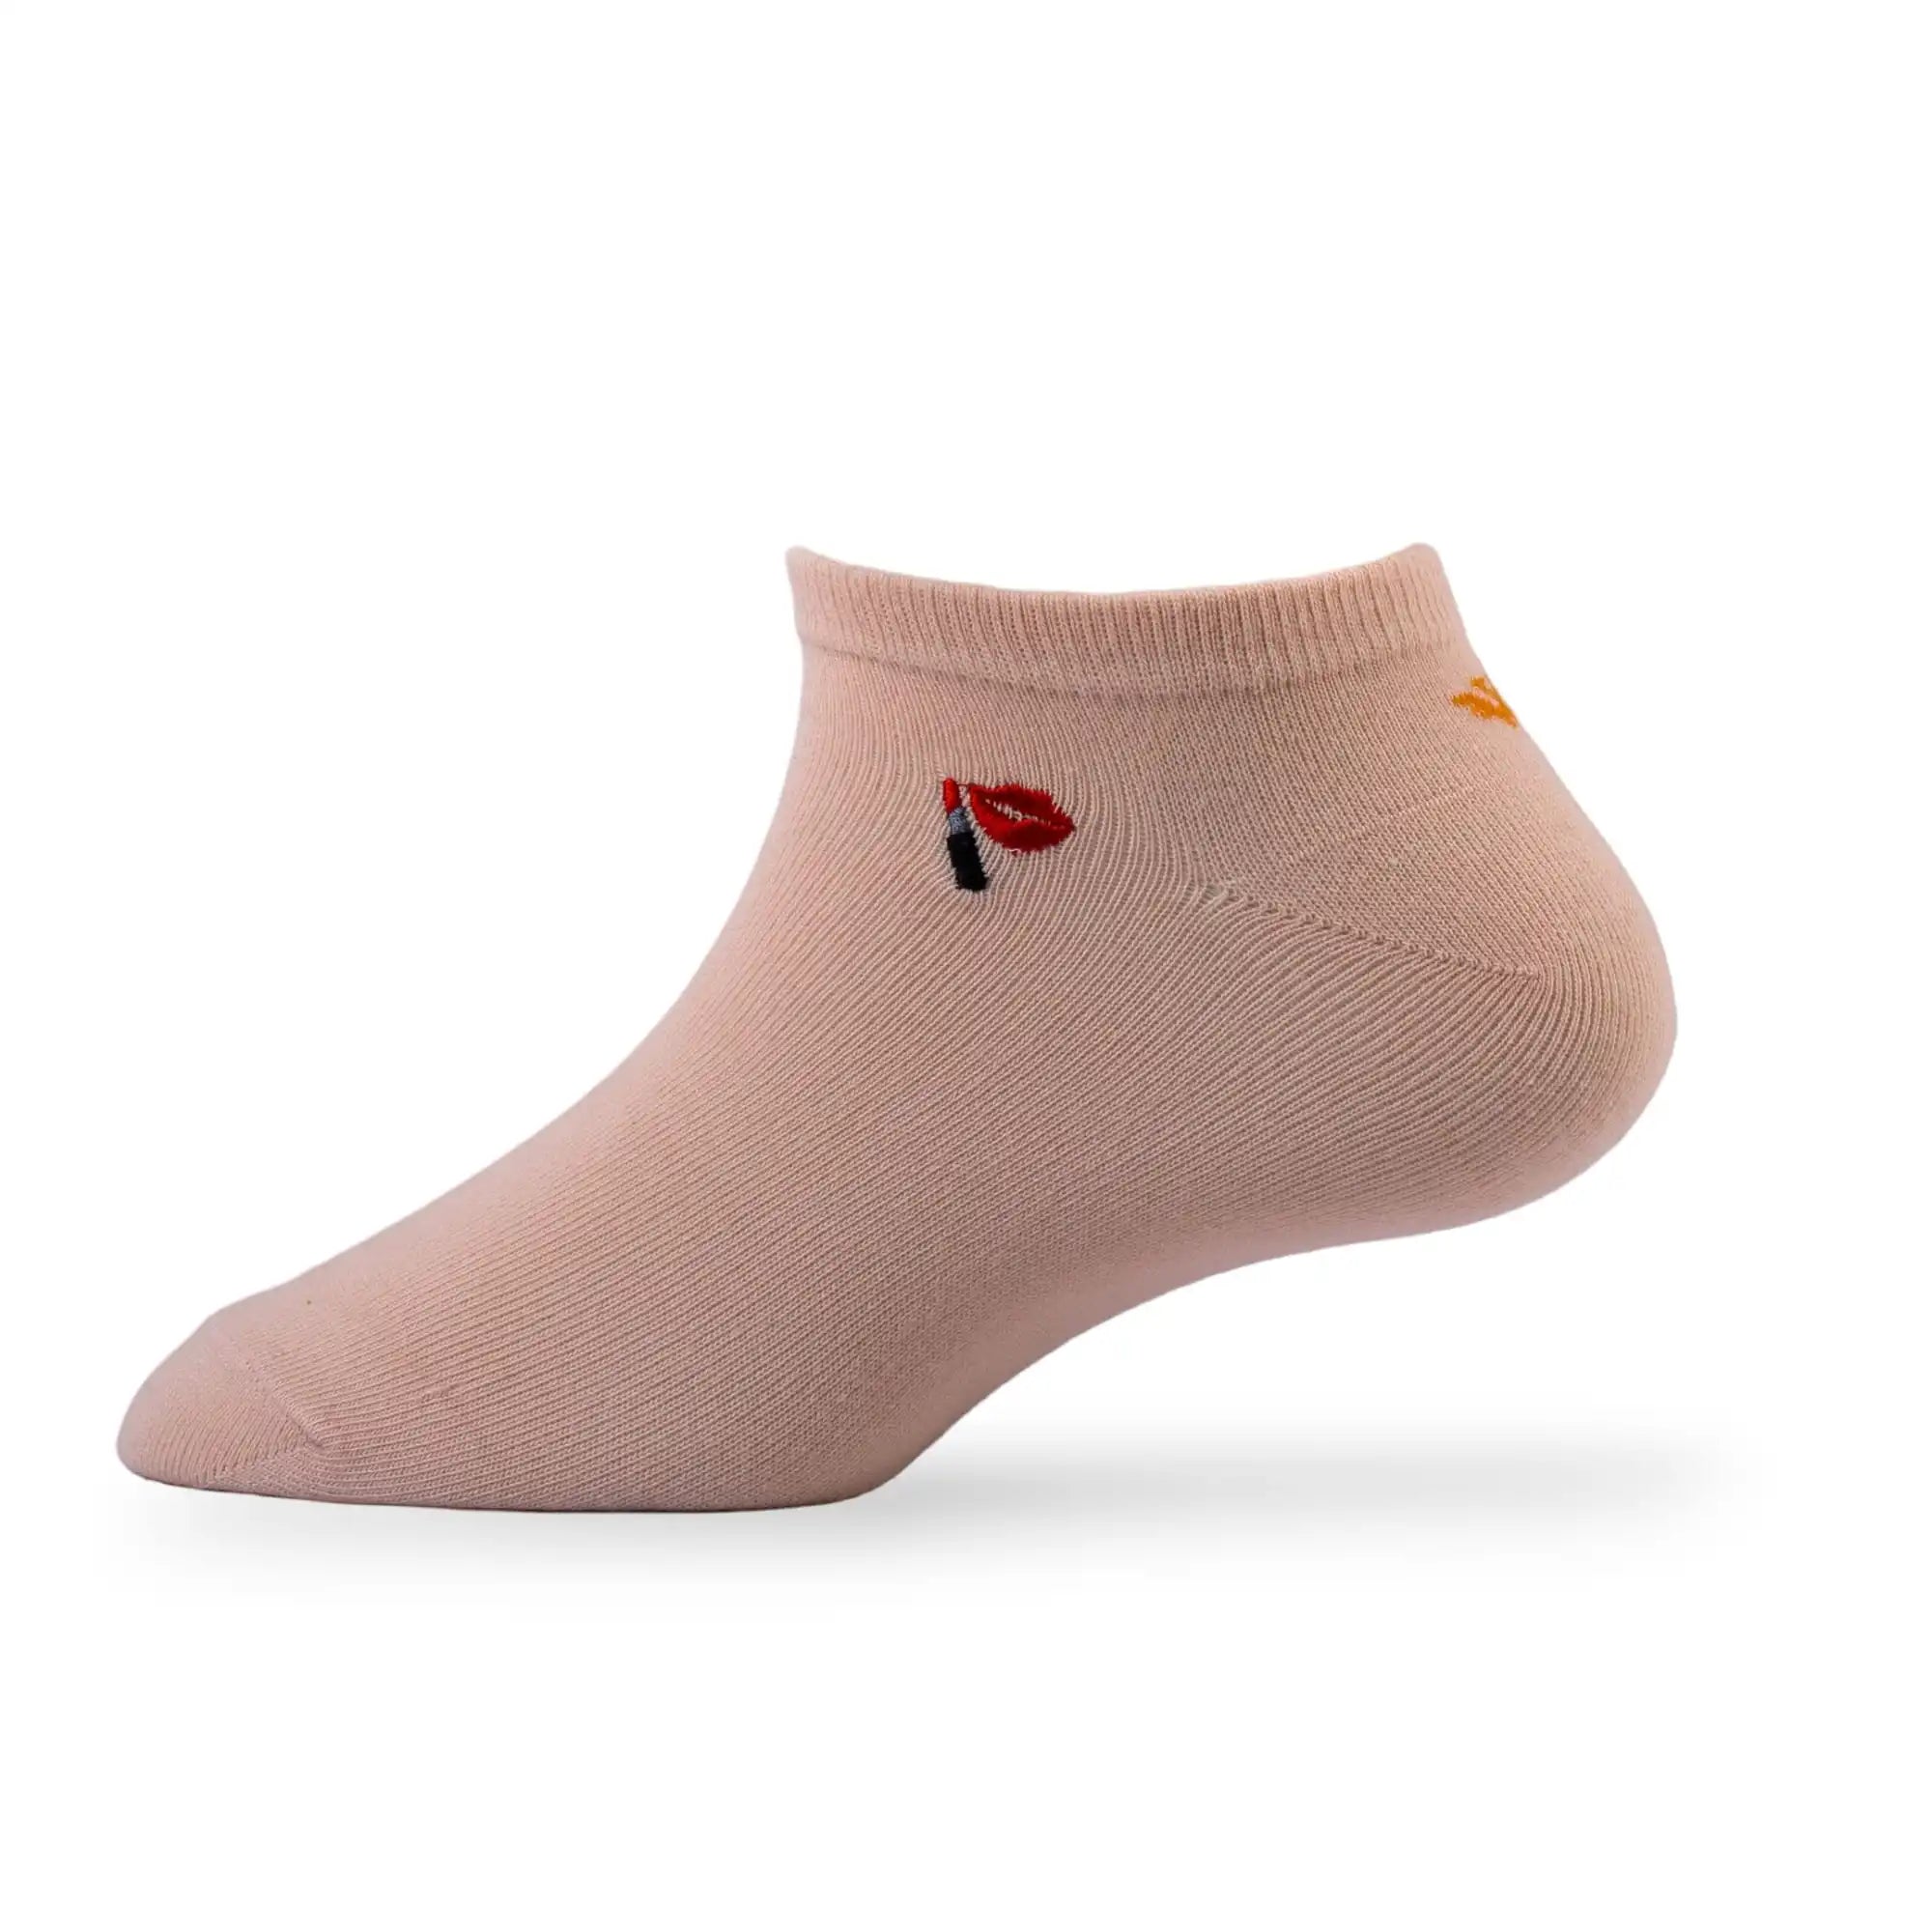 Young Wings Women's Multi Colour Cotton Fabric Solid Low Ankle Length Socks - Pack of 5, Style no. W1-6002N